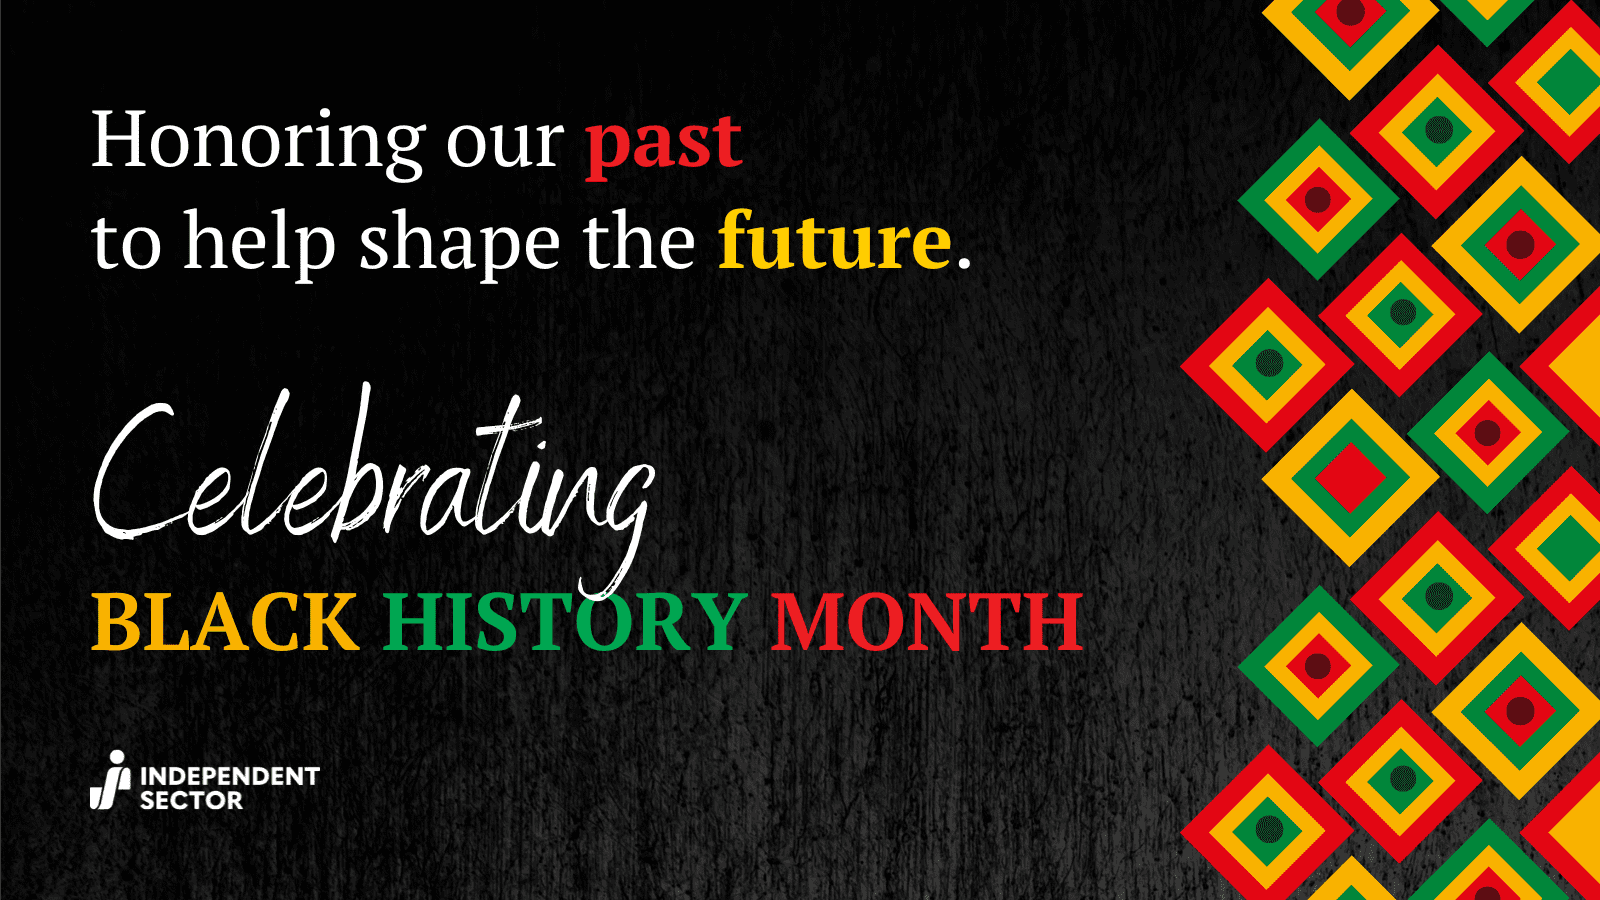 Honoring our past to help shape the future. Celebrating Black History Month. Independent Sector.